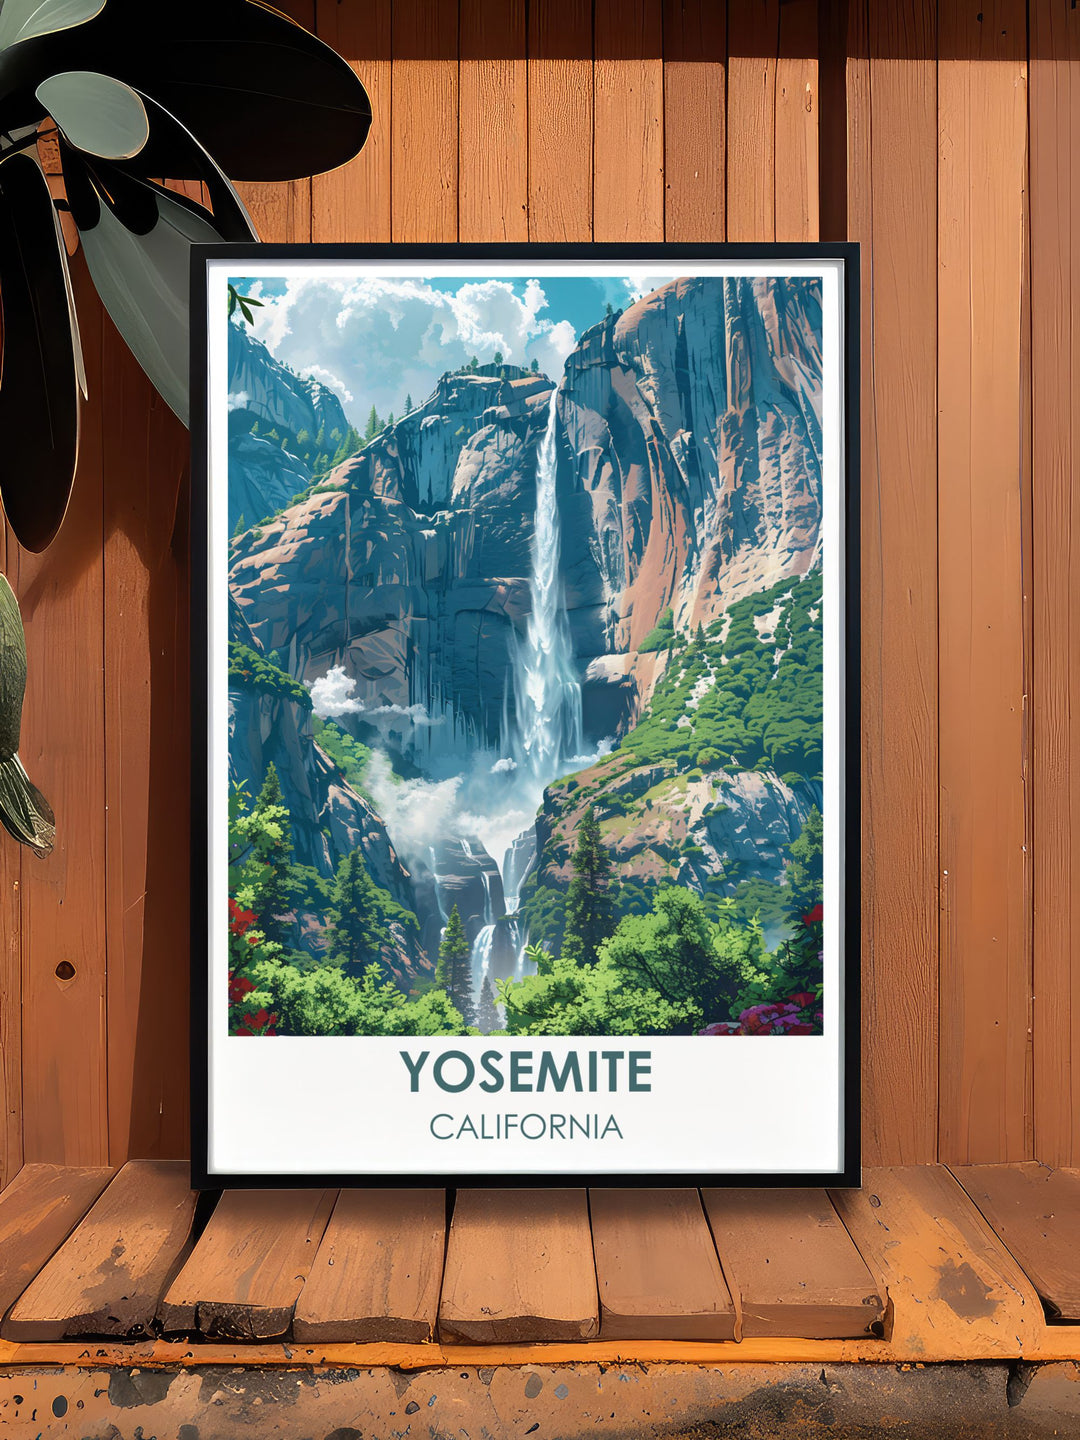 Half Dome, with its majestic presence and smooth granite surface, is the focal point of this Yosemite travel poster, creating a serene and inspiring piece for any nature themed decor.